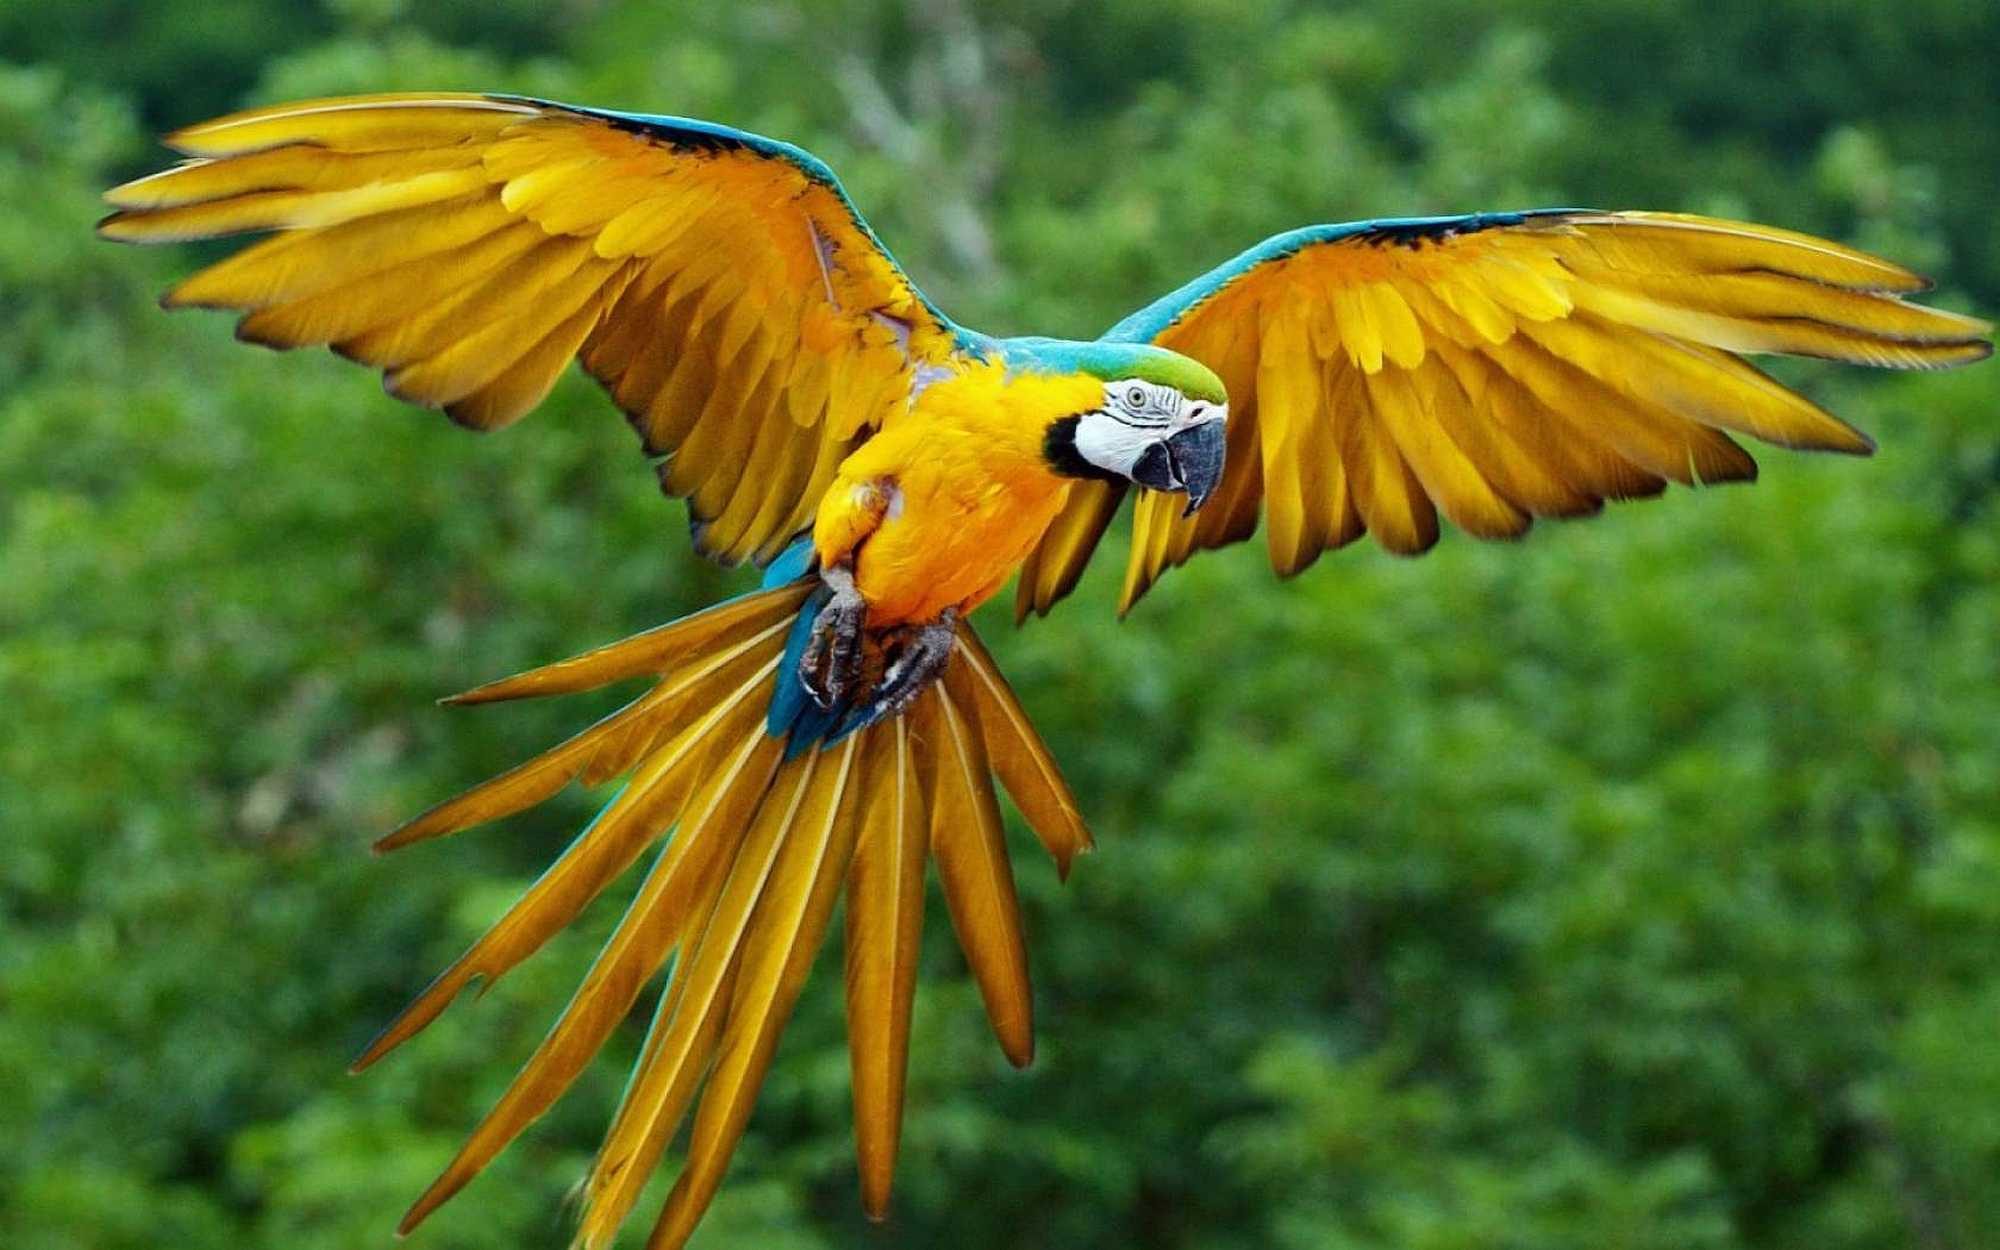 The orange-winged parrot (Amazona amazonica) and the blue and yellow macaw (Ara ararauna) pictured, were the most traded parrot species - Photo by Luc Viatour